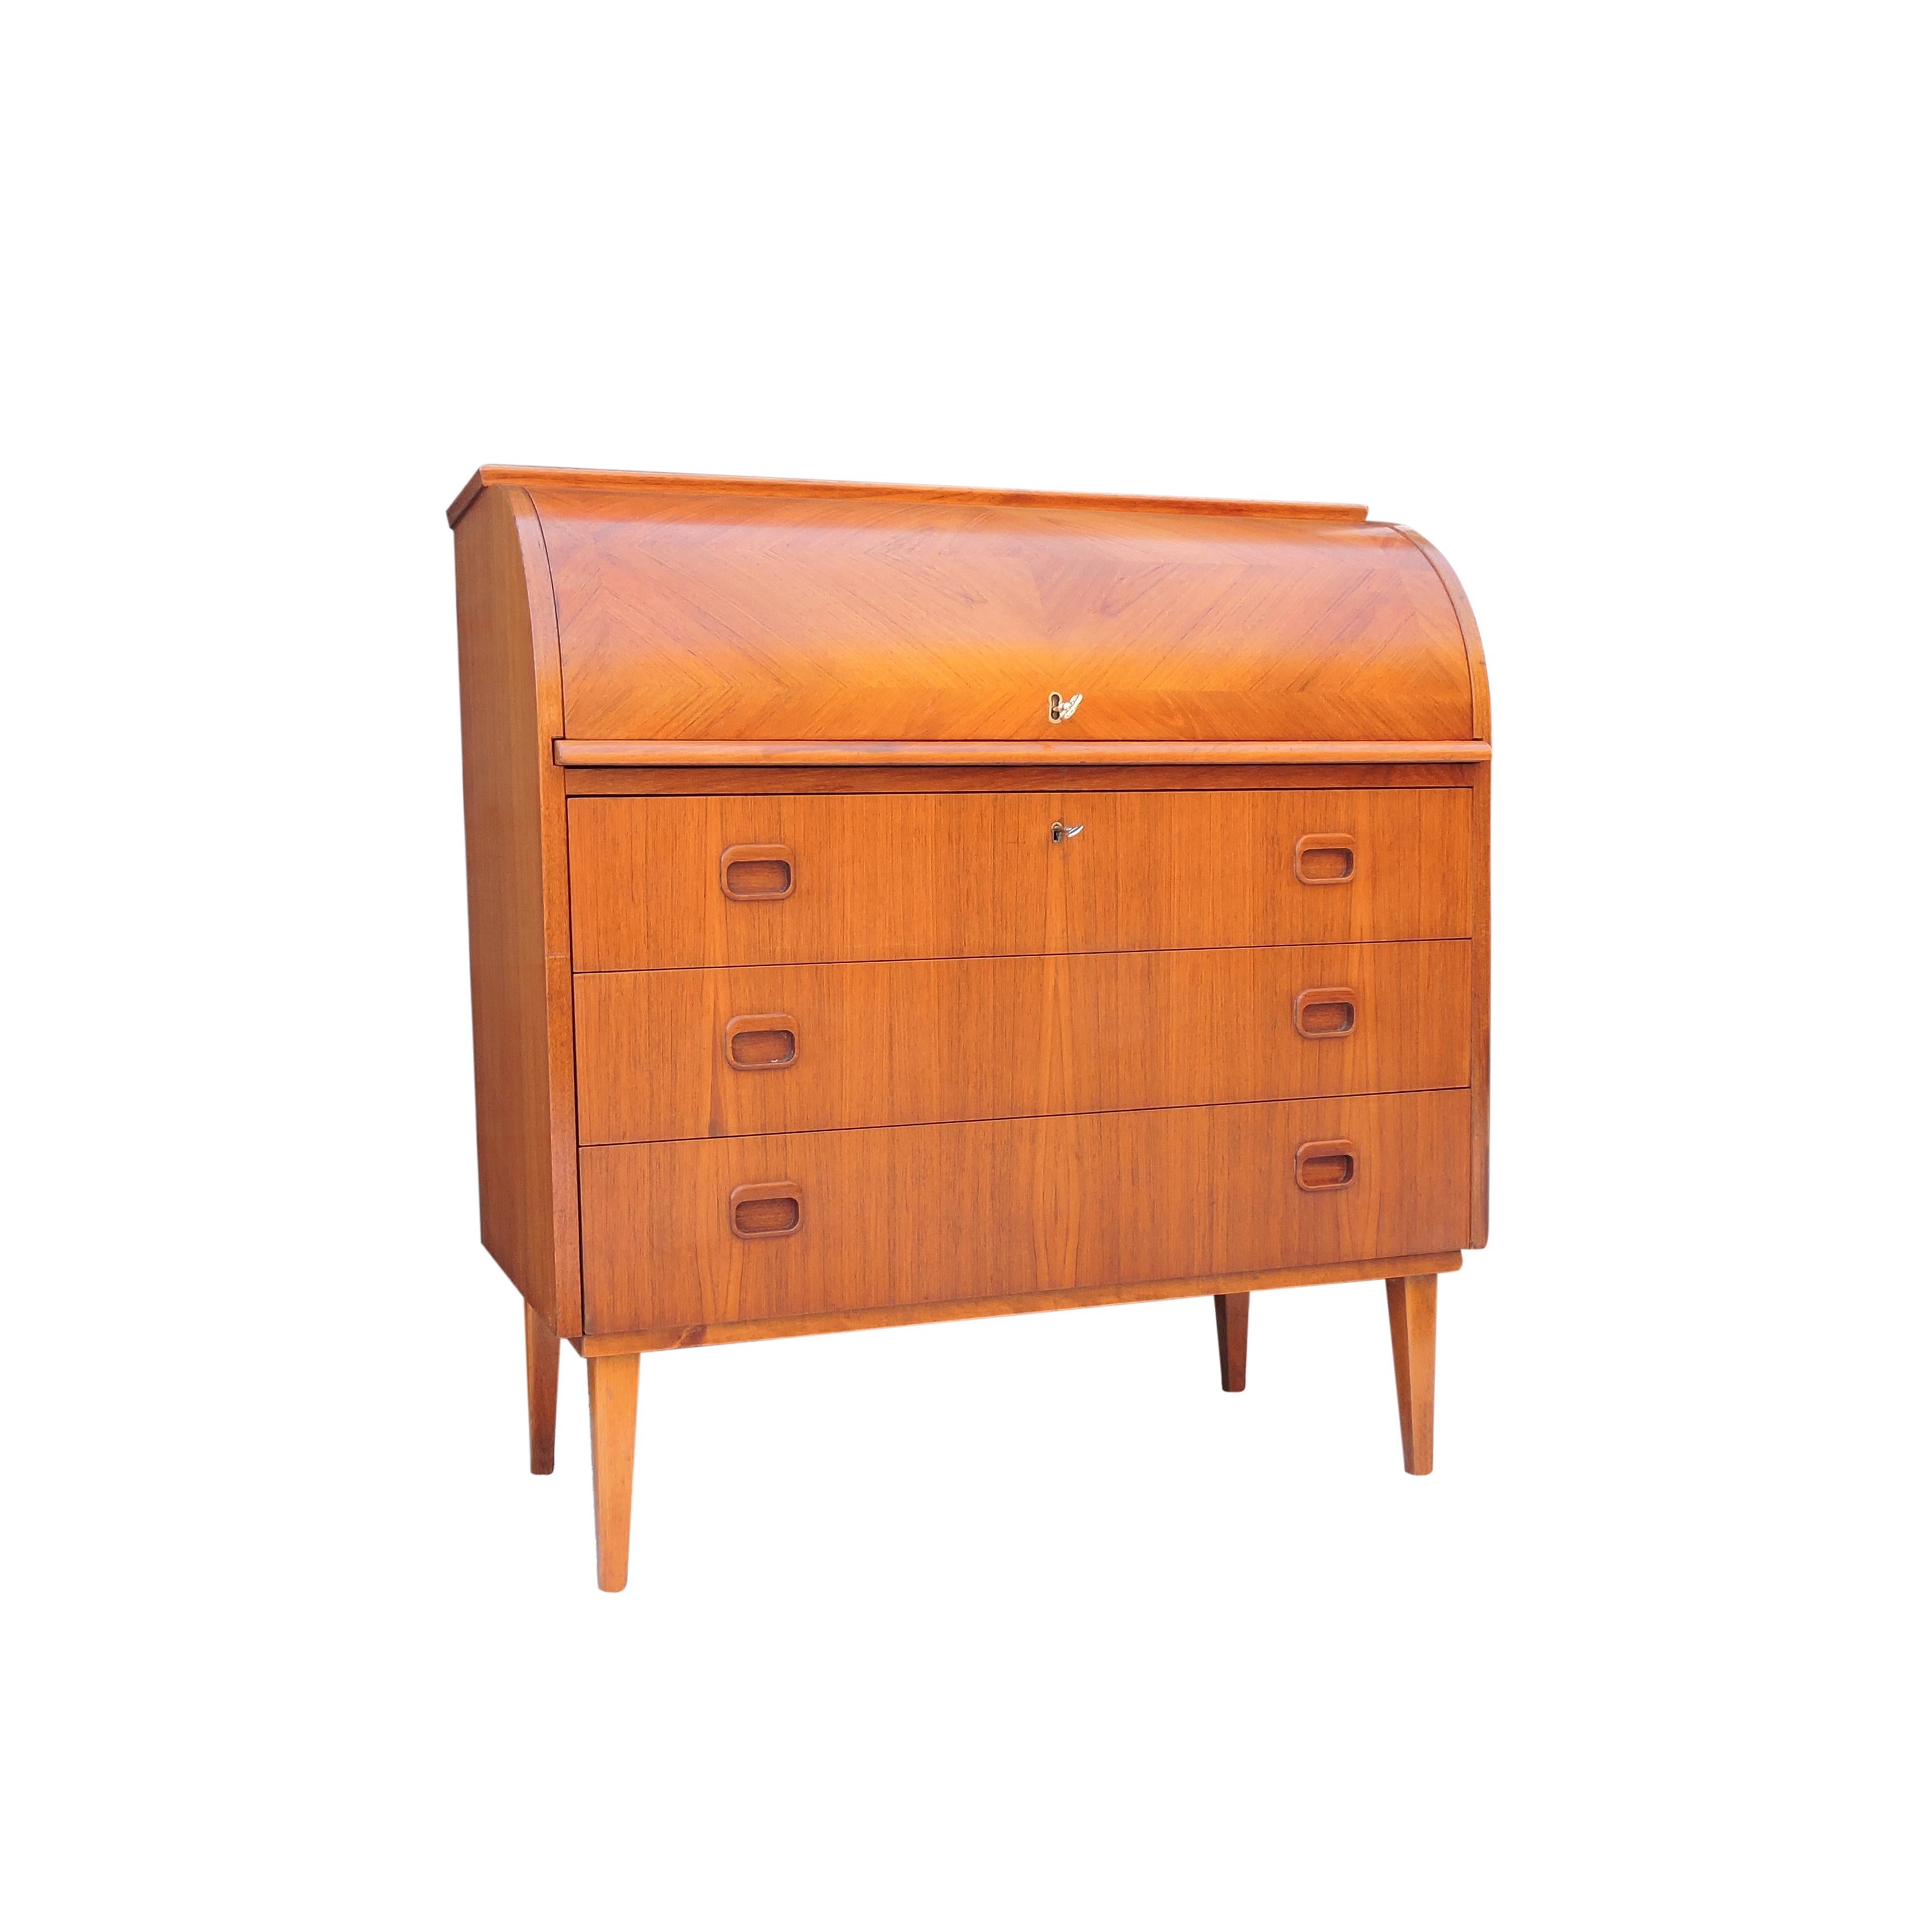 A Swedish teak cylinder roll top desk/bureau designed by Egon Ostergaard in the 1960s. Featuring a pullout / pull-out desk and a quad cut veneer design on the roll top.